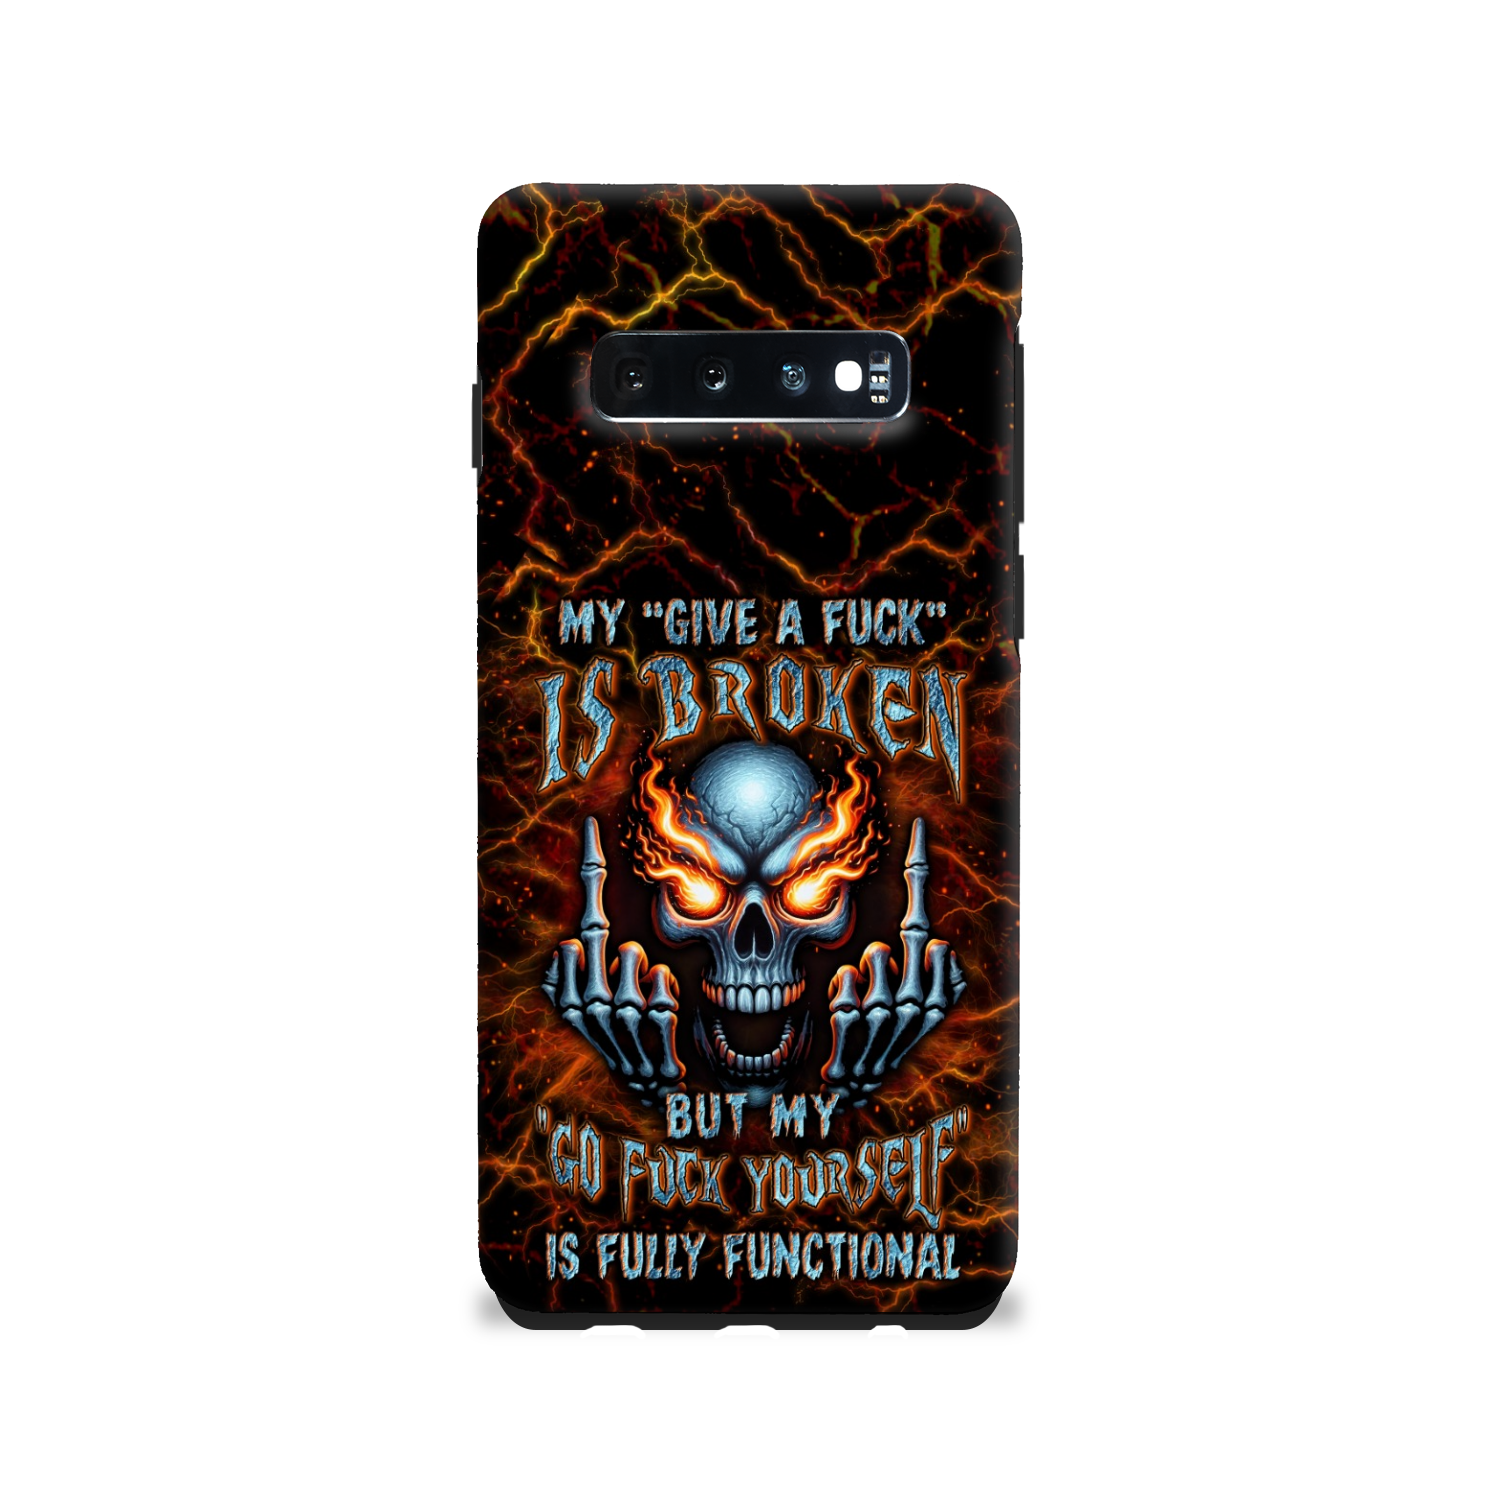 MY GIVE A F IS BROKEN PHONE CASE - YHLN0803242